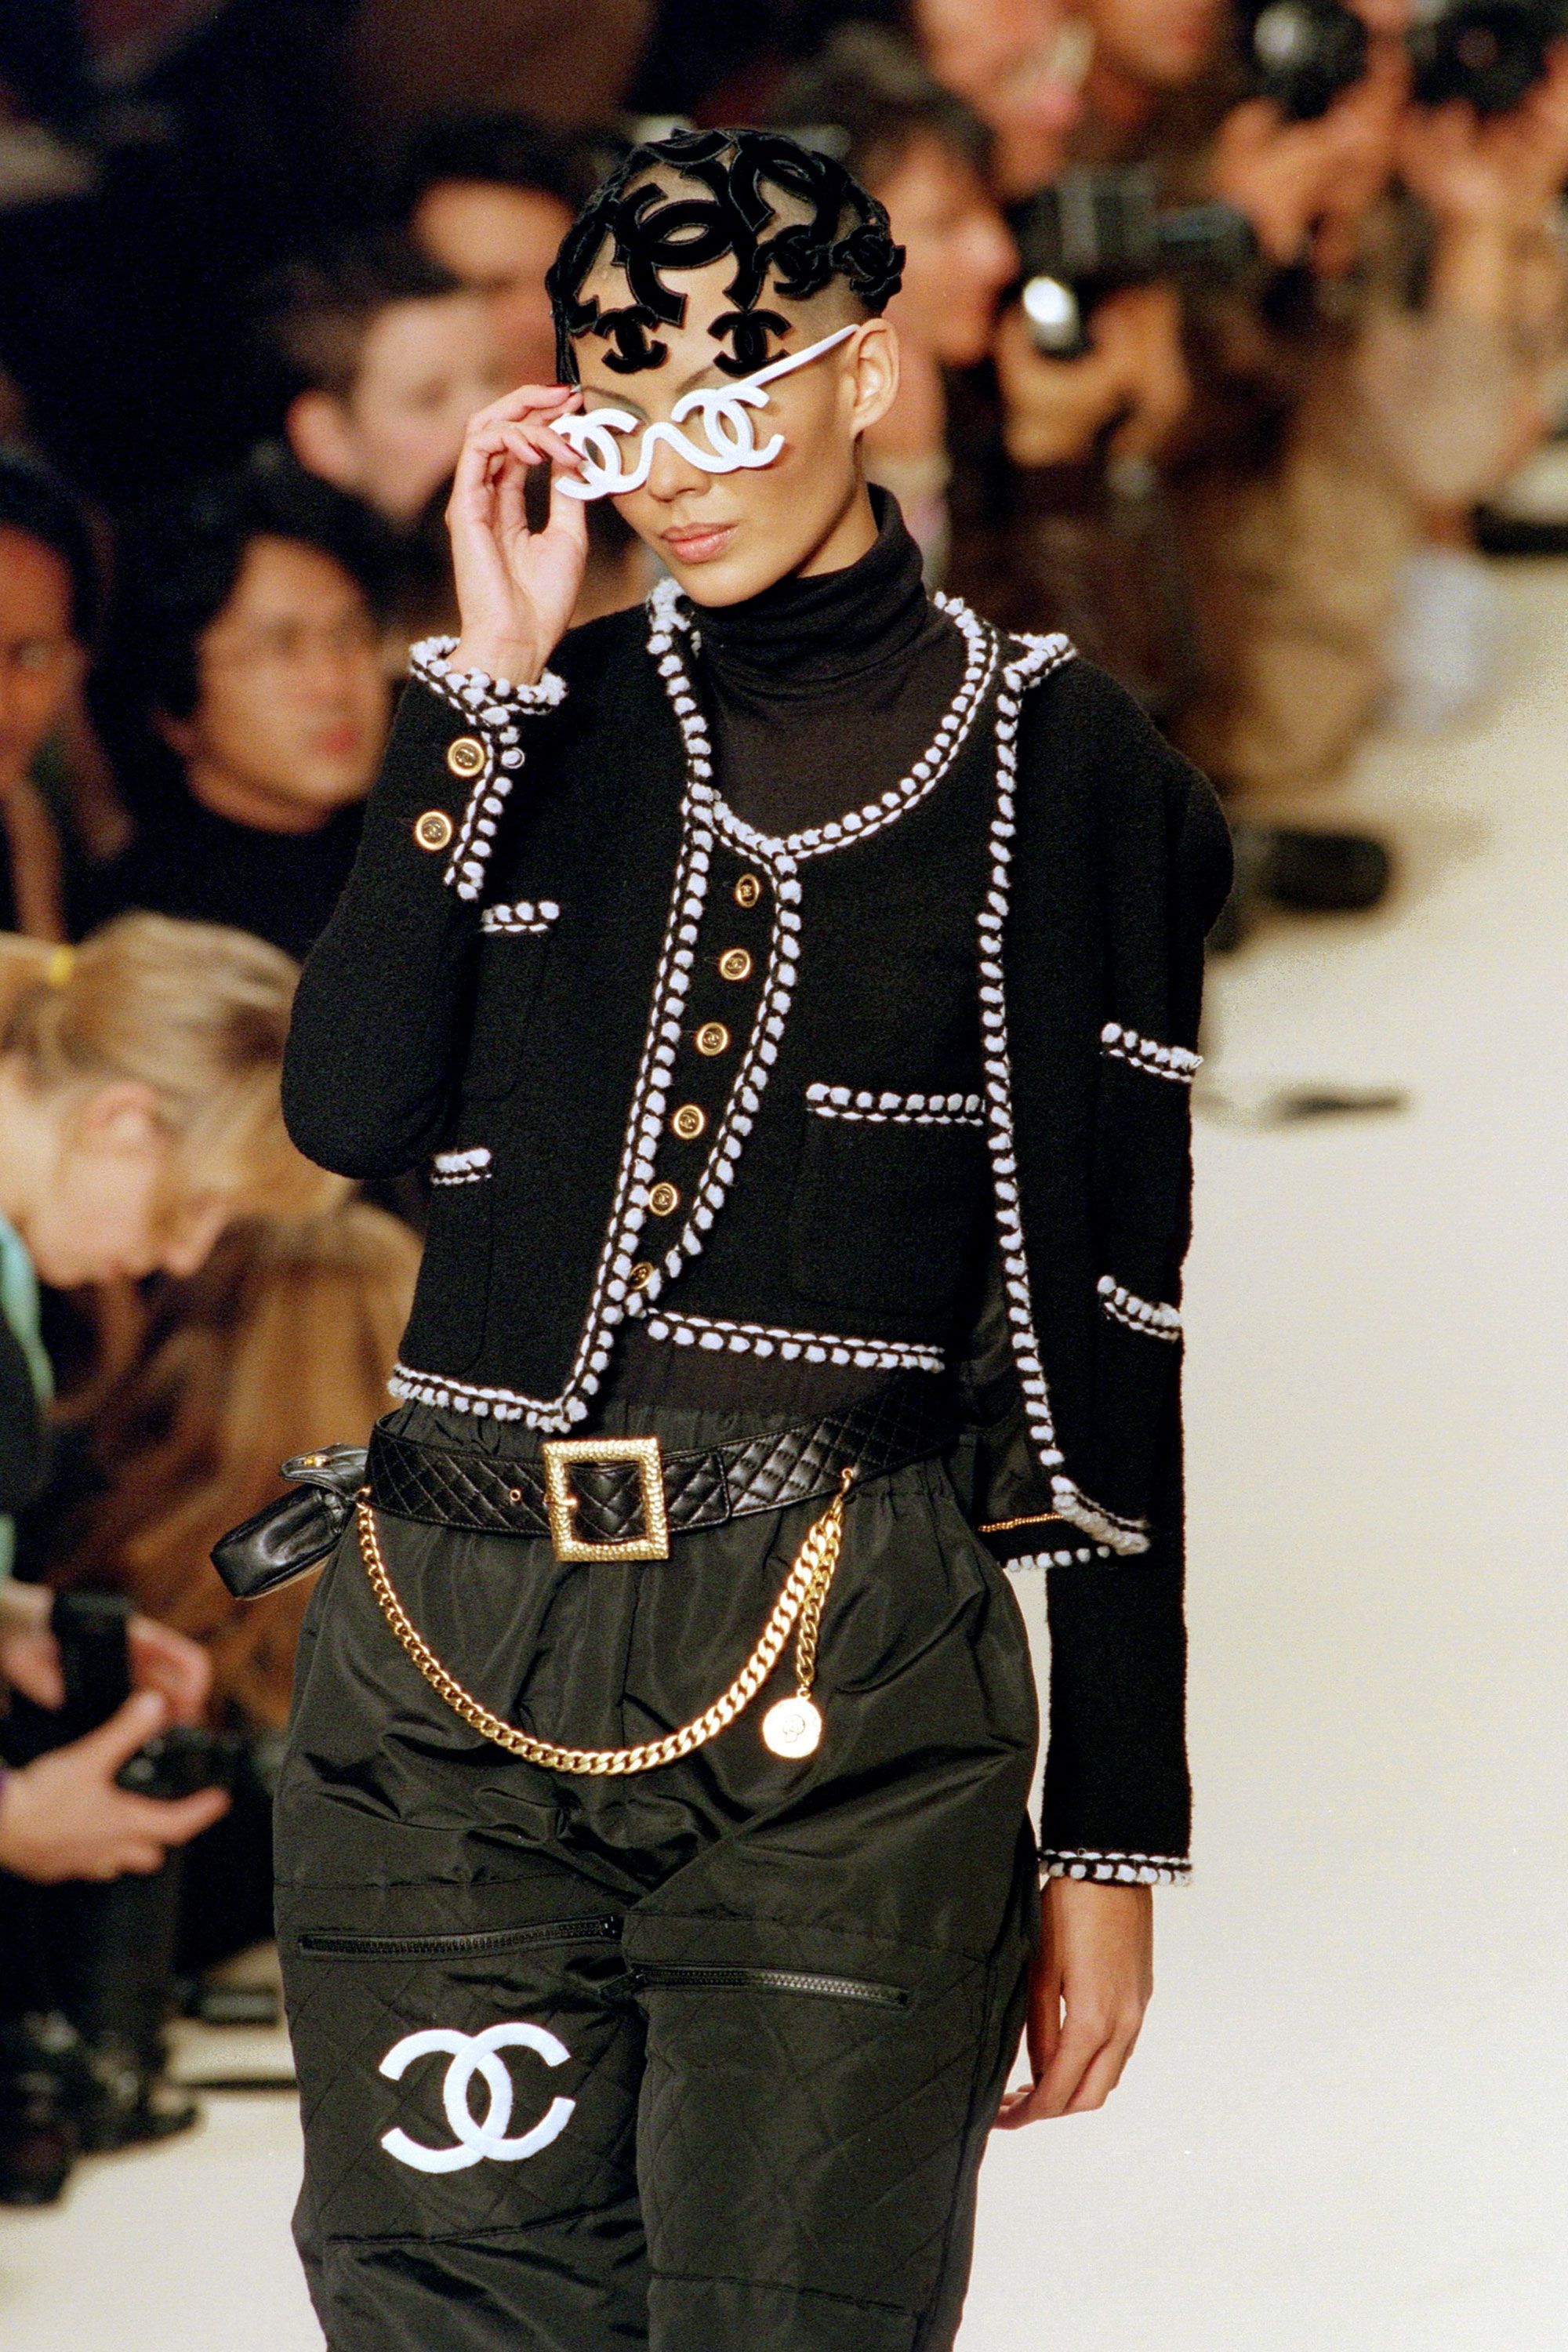 indre rack Pjece Chanel's Fashion Shows Over the Years - 1978 - 2015 Chanel Runway Images